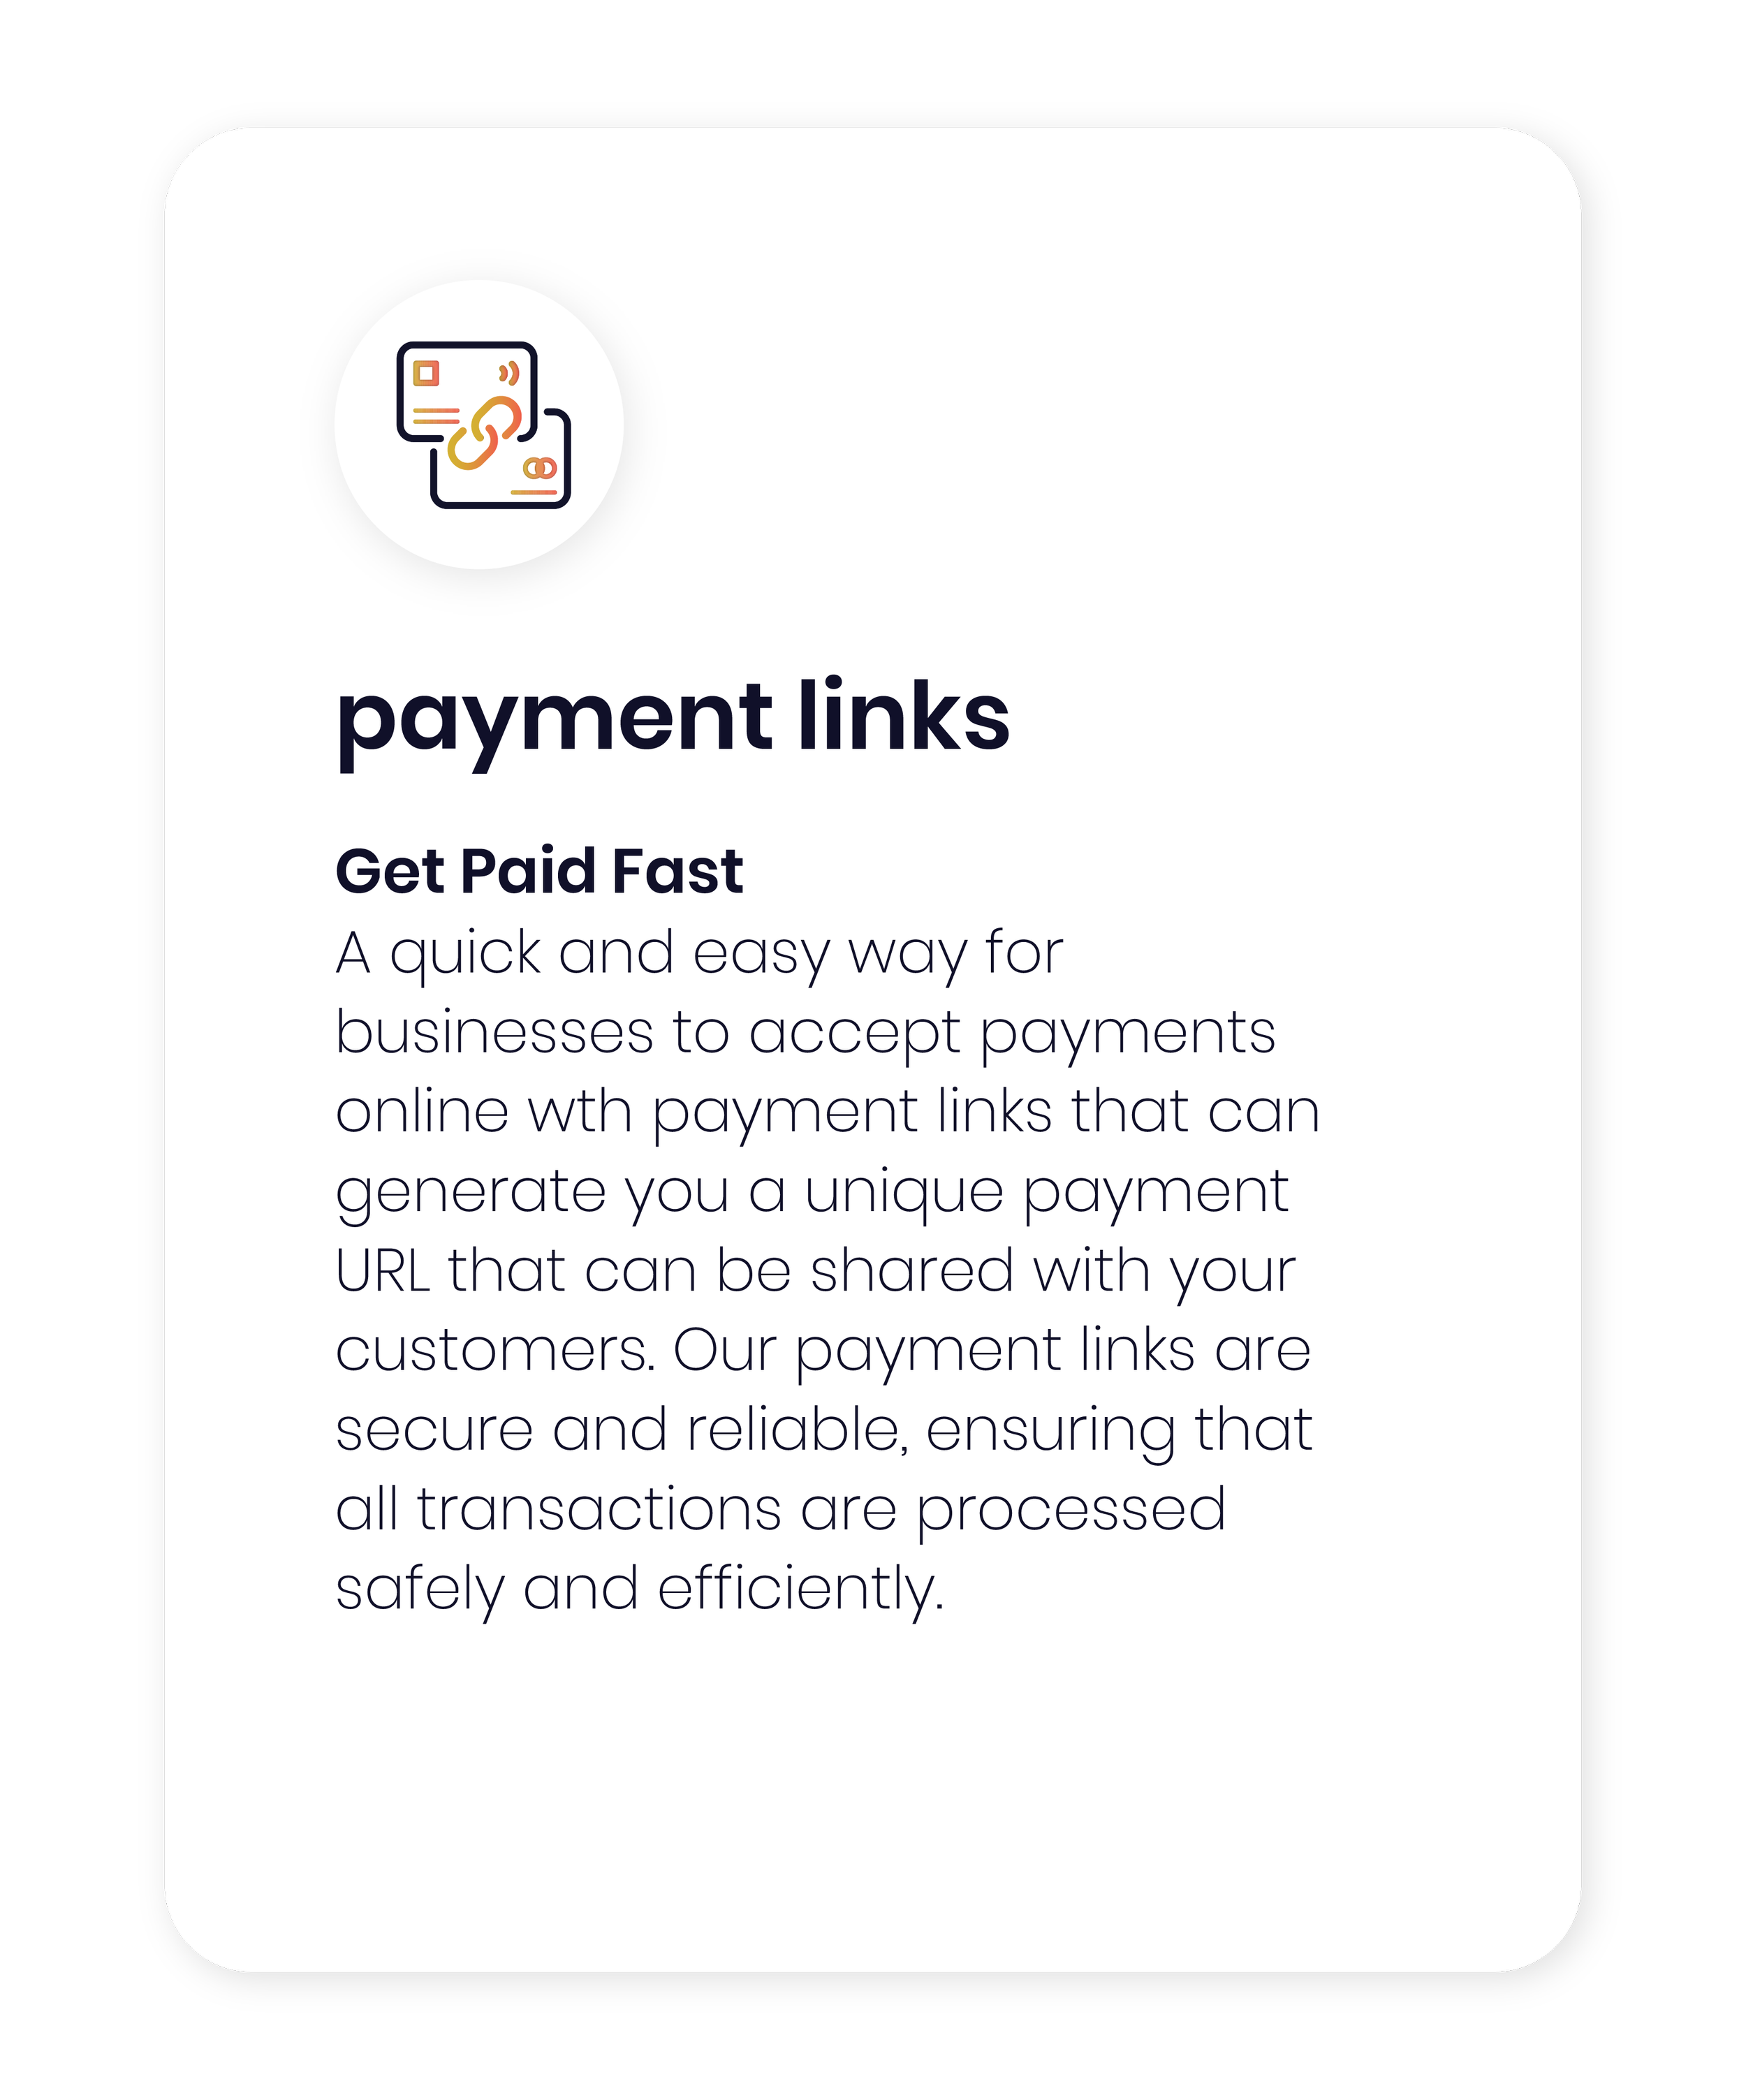 Payment Links